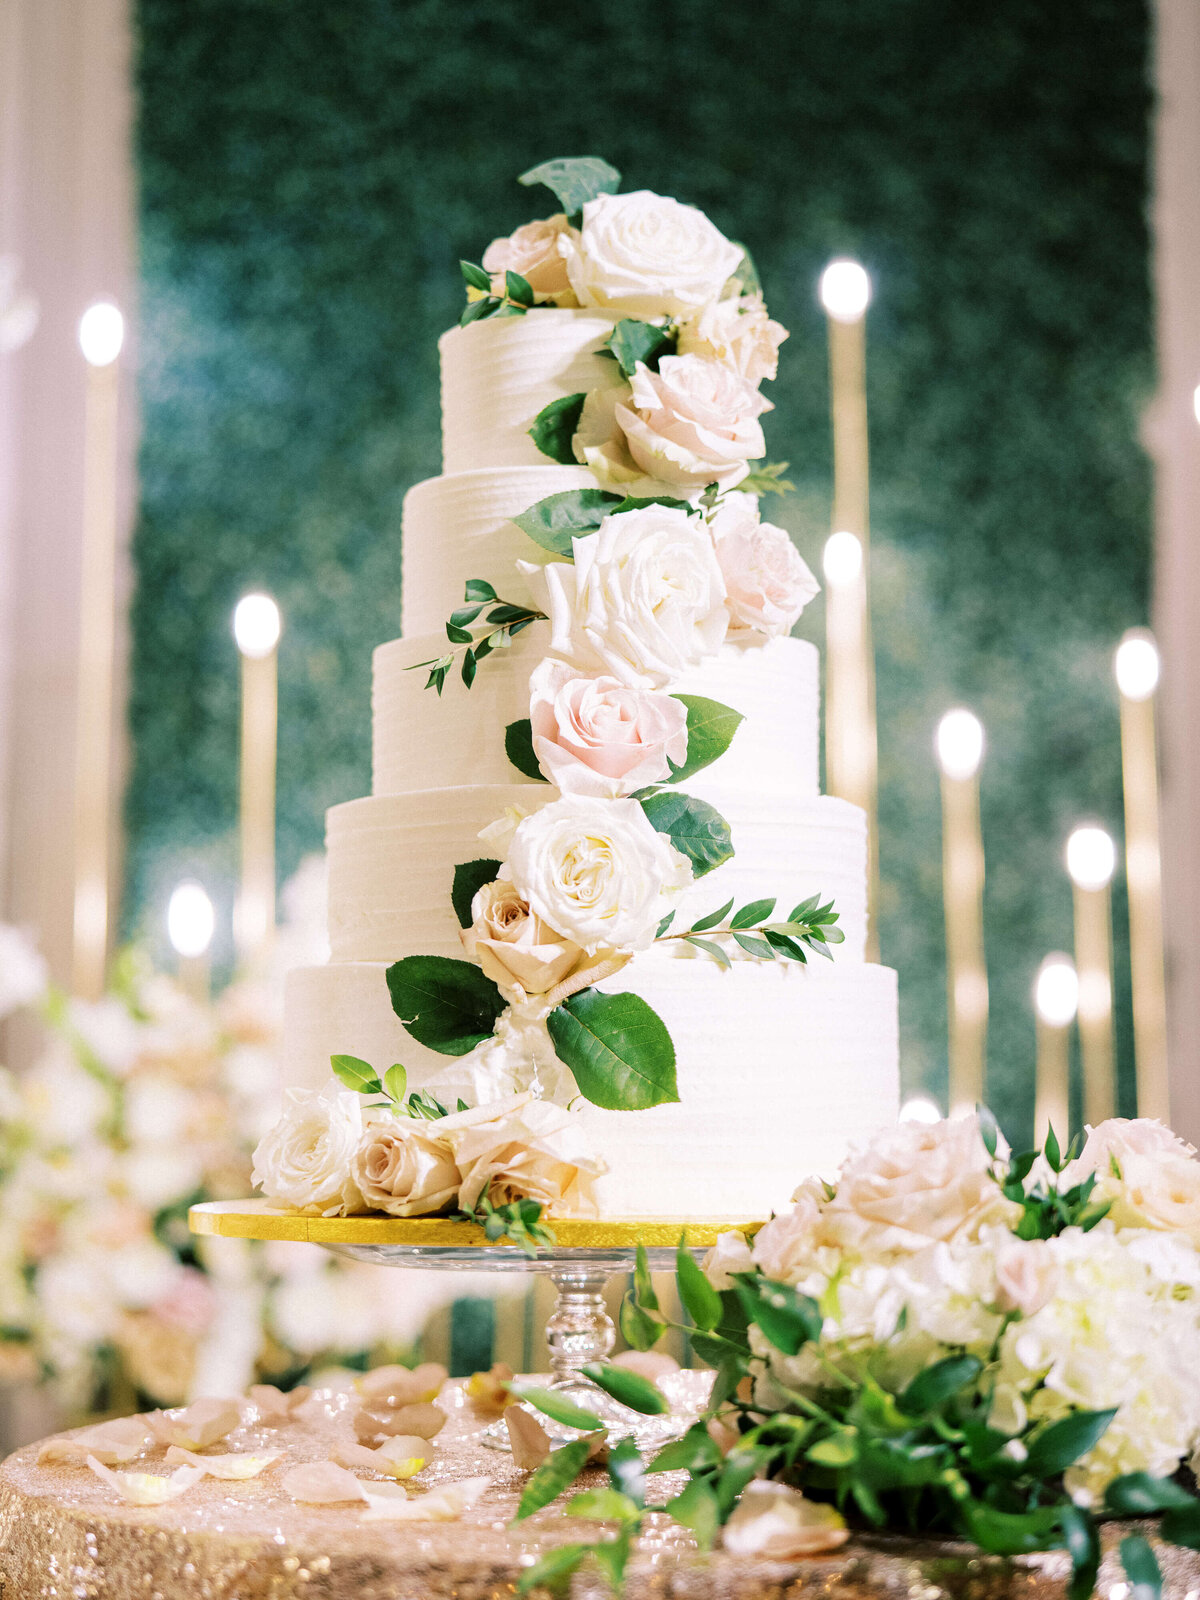 Romantic white wedding cake with roses and greenery and candles